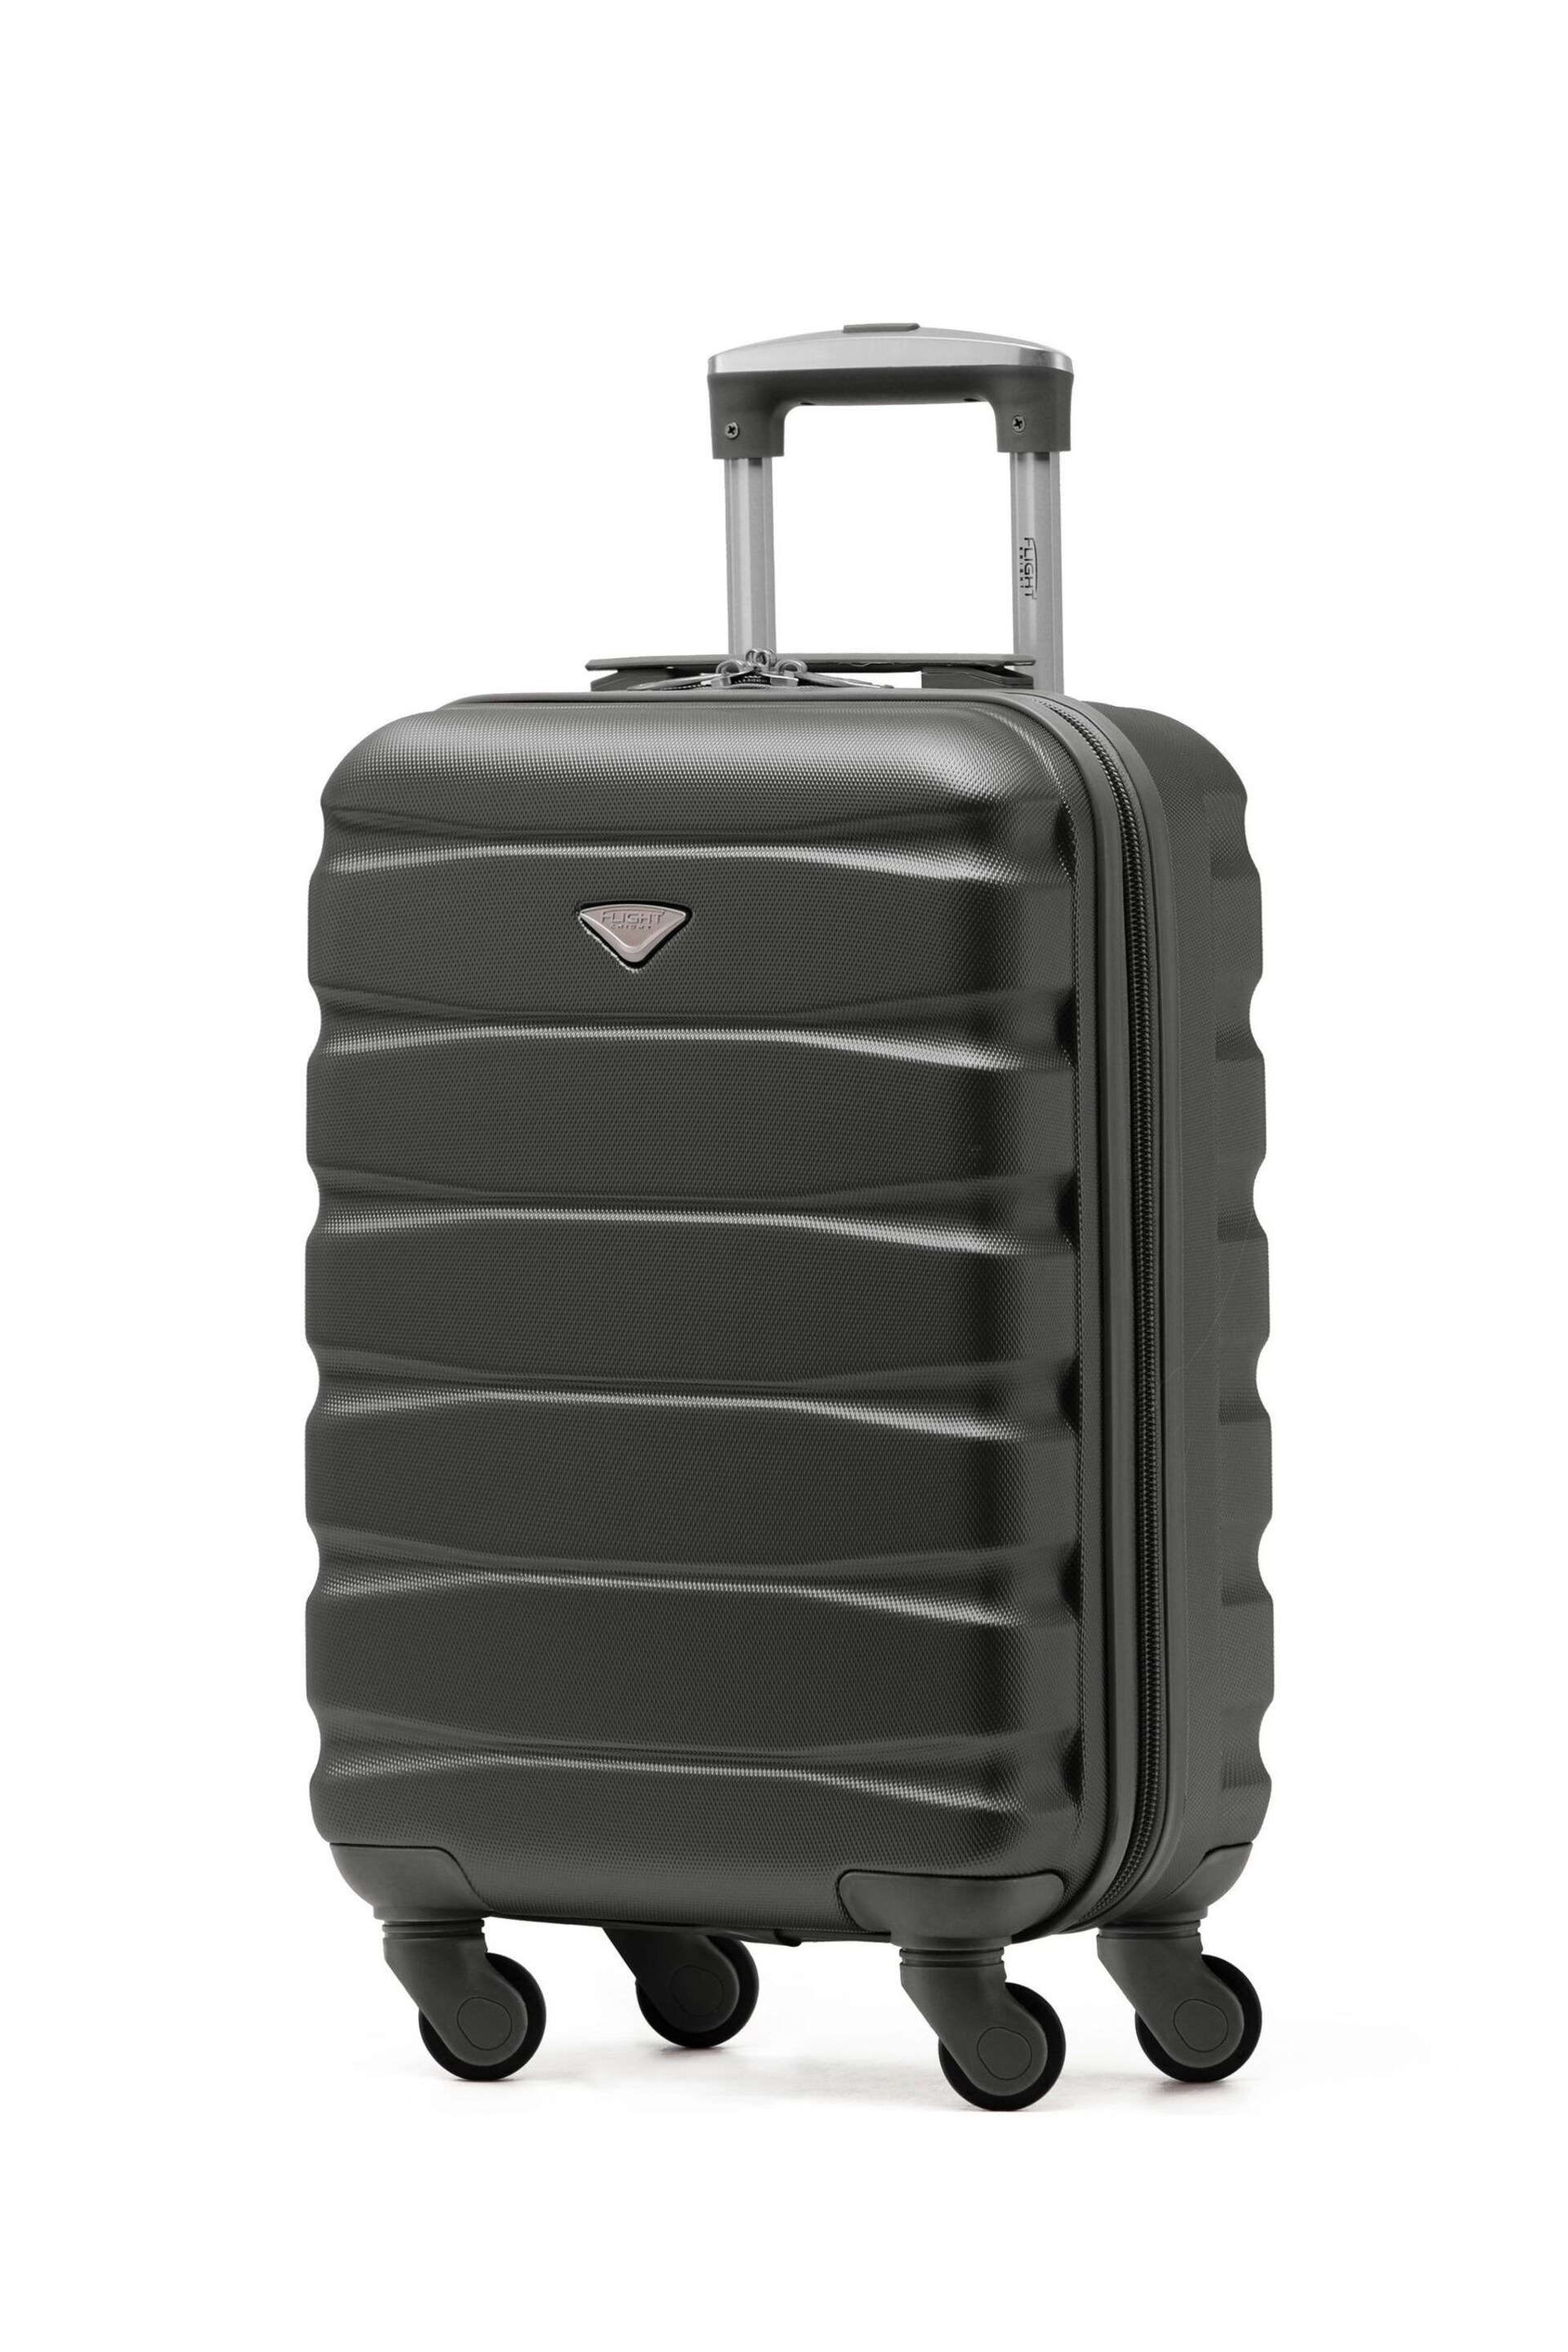 Flight Knight Hard Shell ABS Easyjet Size Cabin Carry On Case - Image 1 of 7